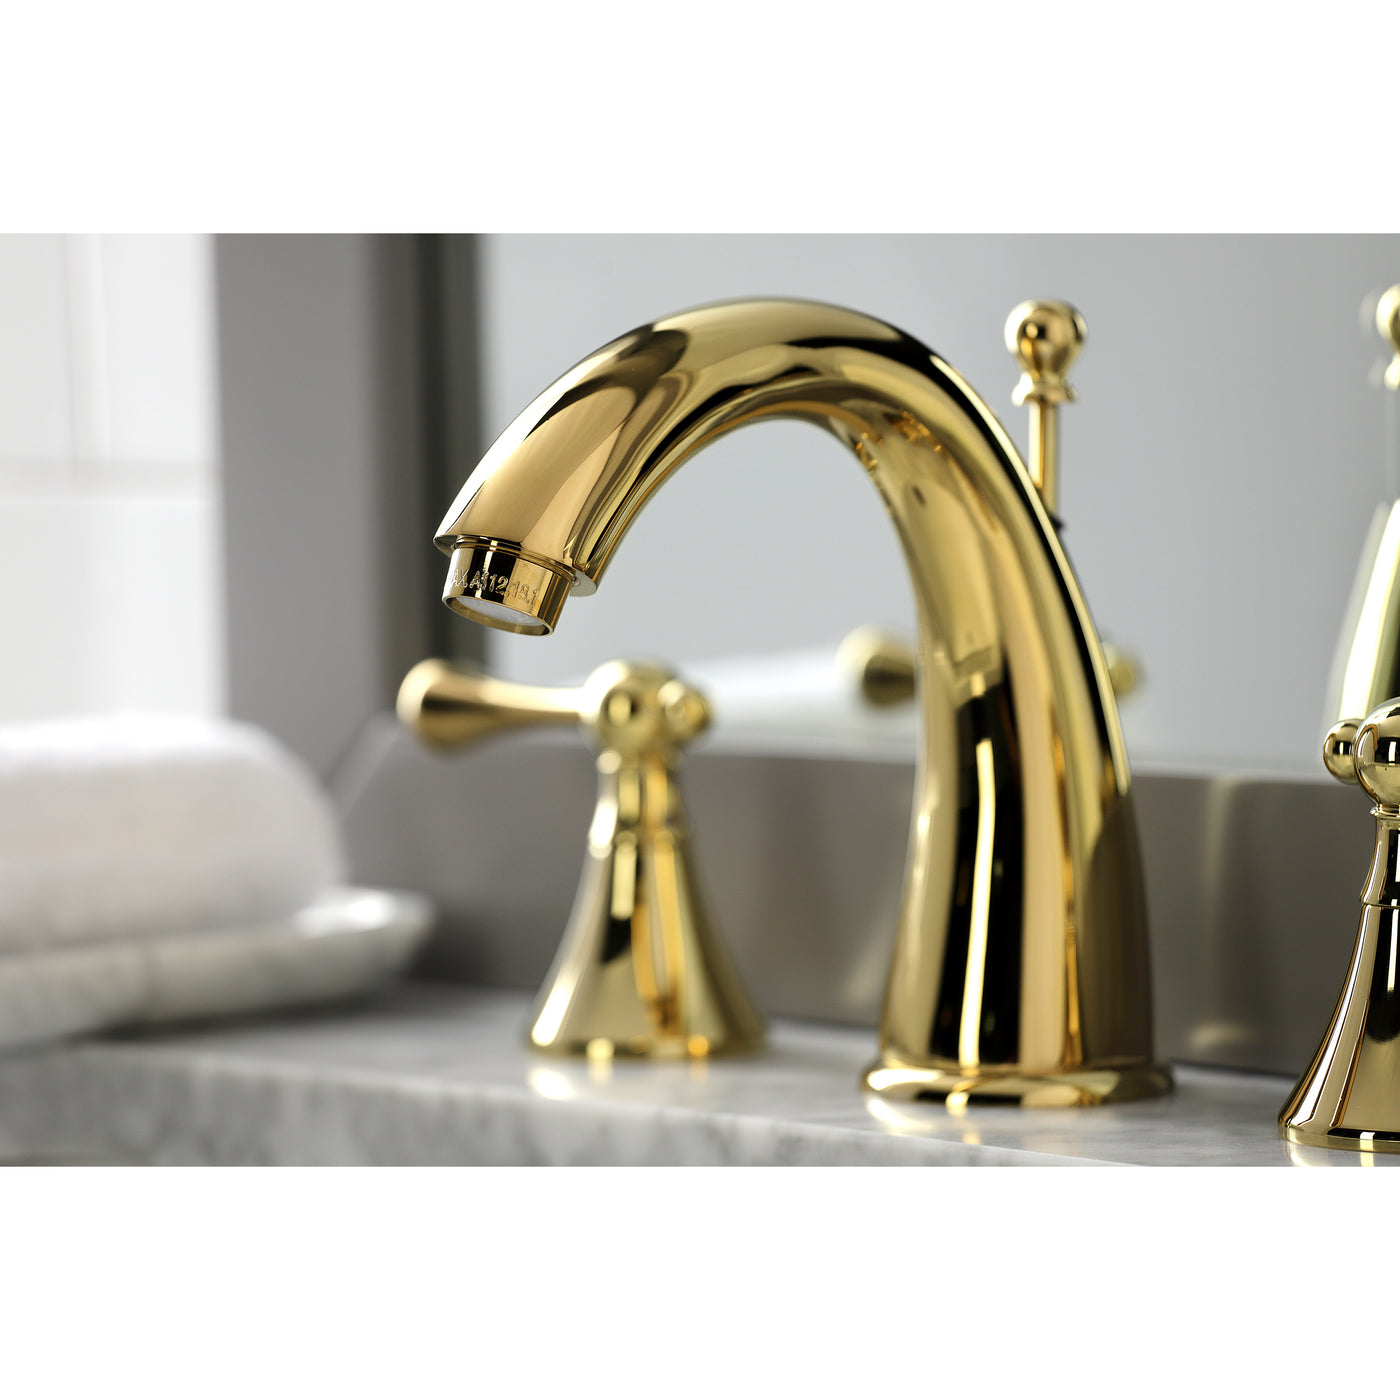 Elements of Design ES2972BL Widespread Bathroom Faucet with Brass Pop-Up, Polished Brass